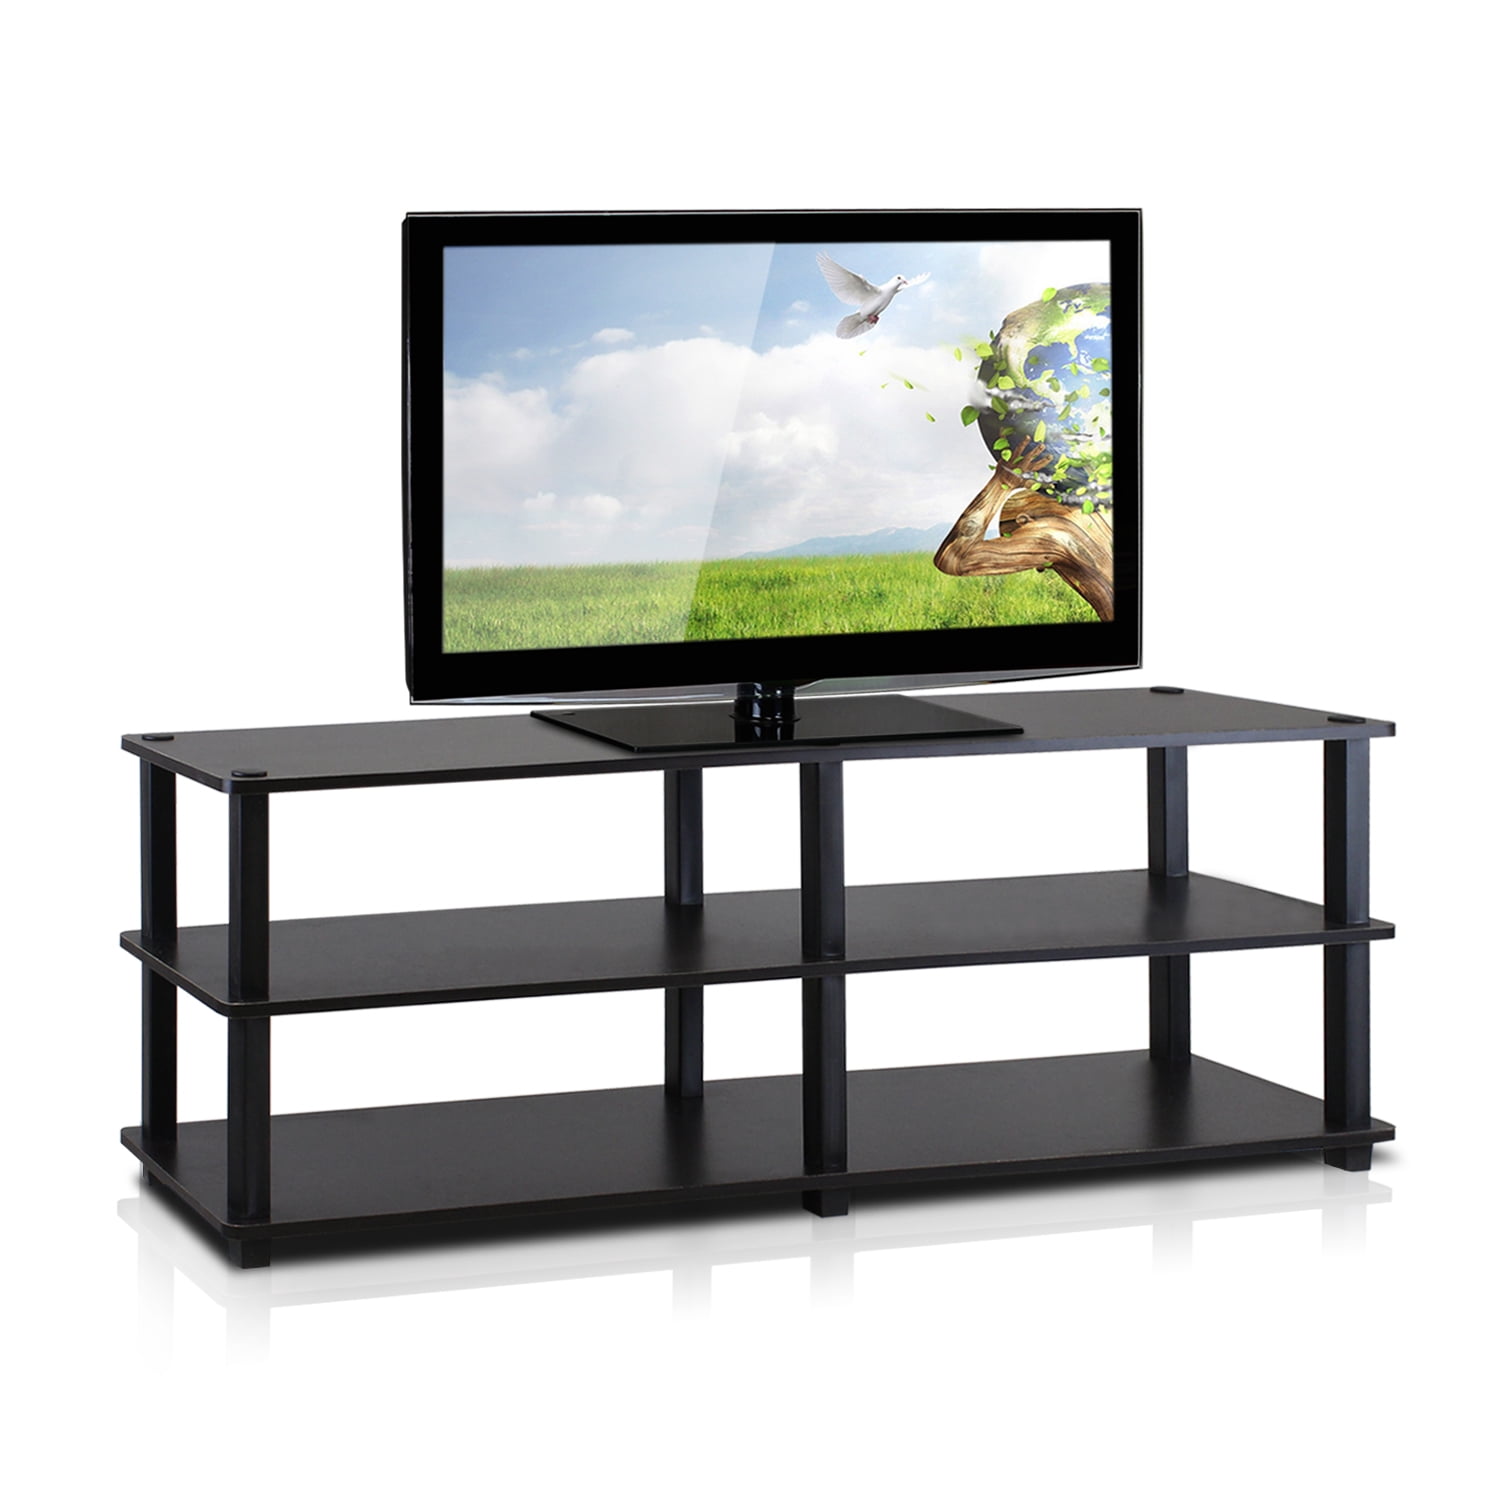 Details about   Furinno Just No Tools Dark Cherry Mid Television Stand With Black Tube 